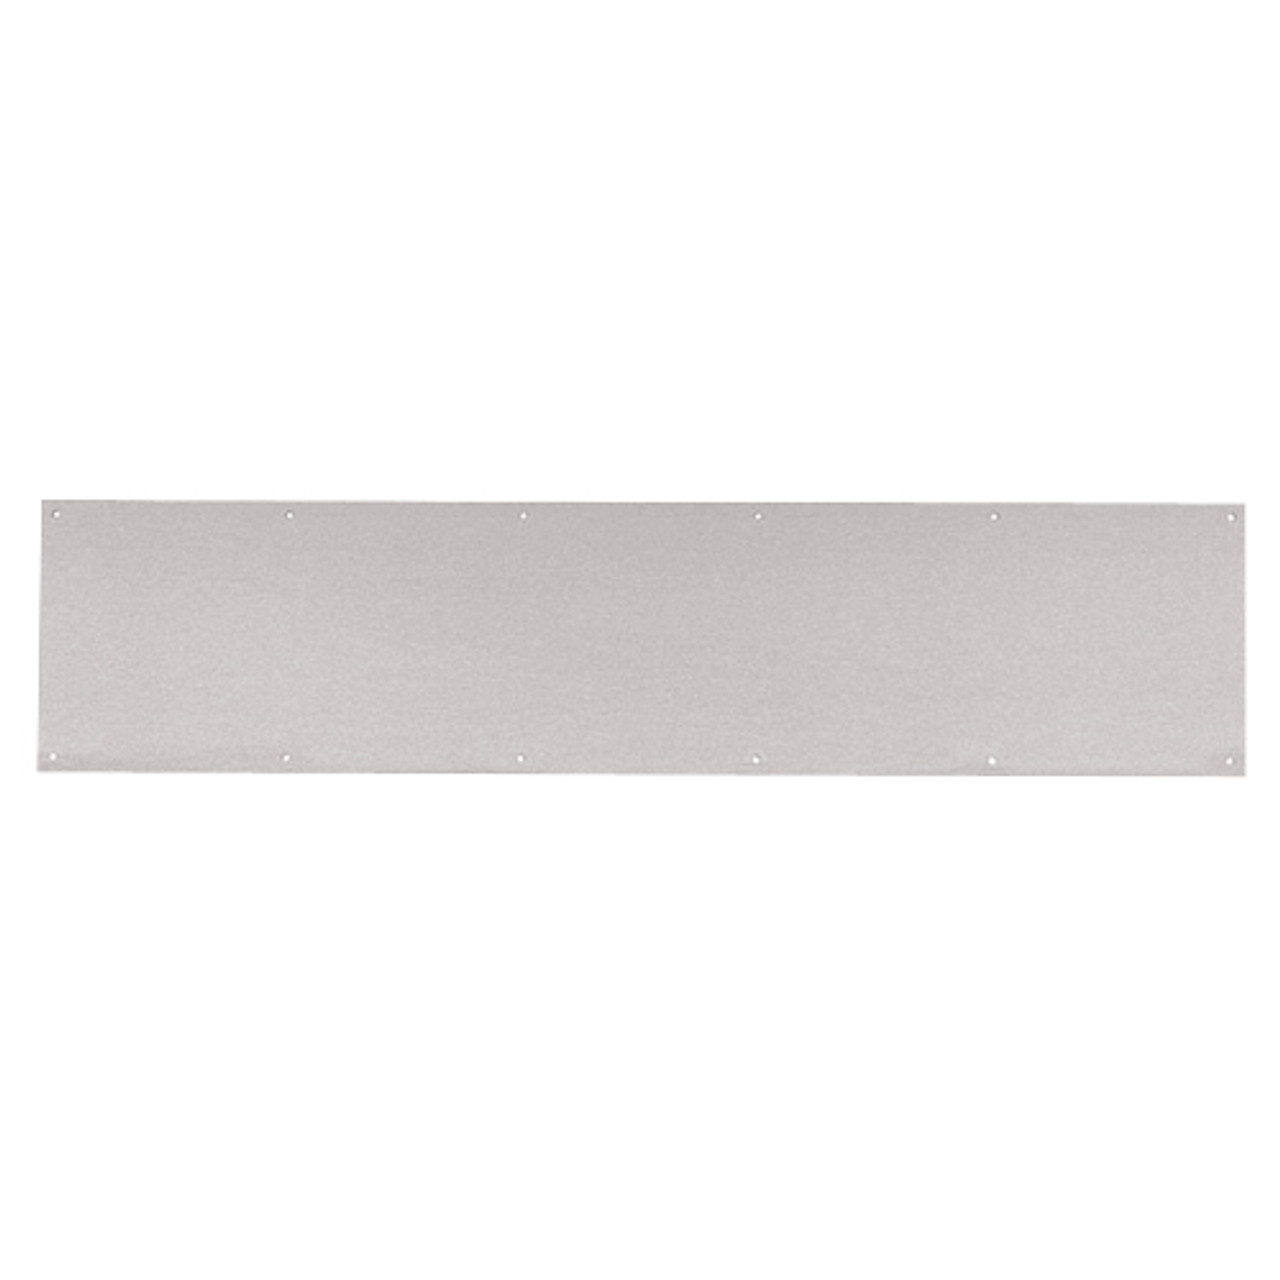 8400-US32D-36x30-B-CS Ives 8400 Series Protection Plate in Satin Stainless Steel